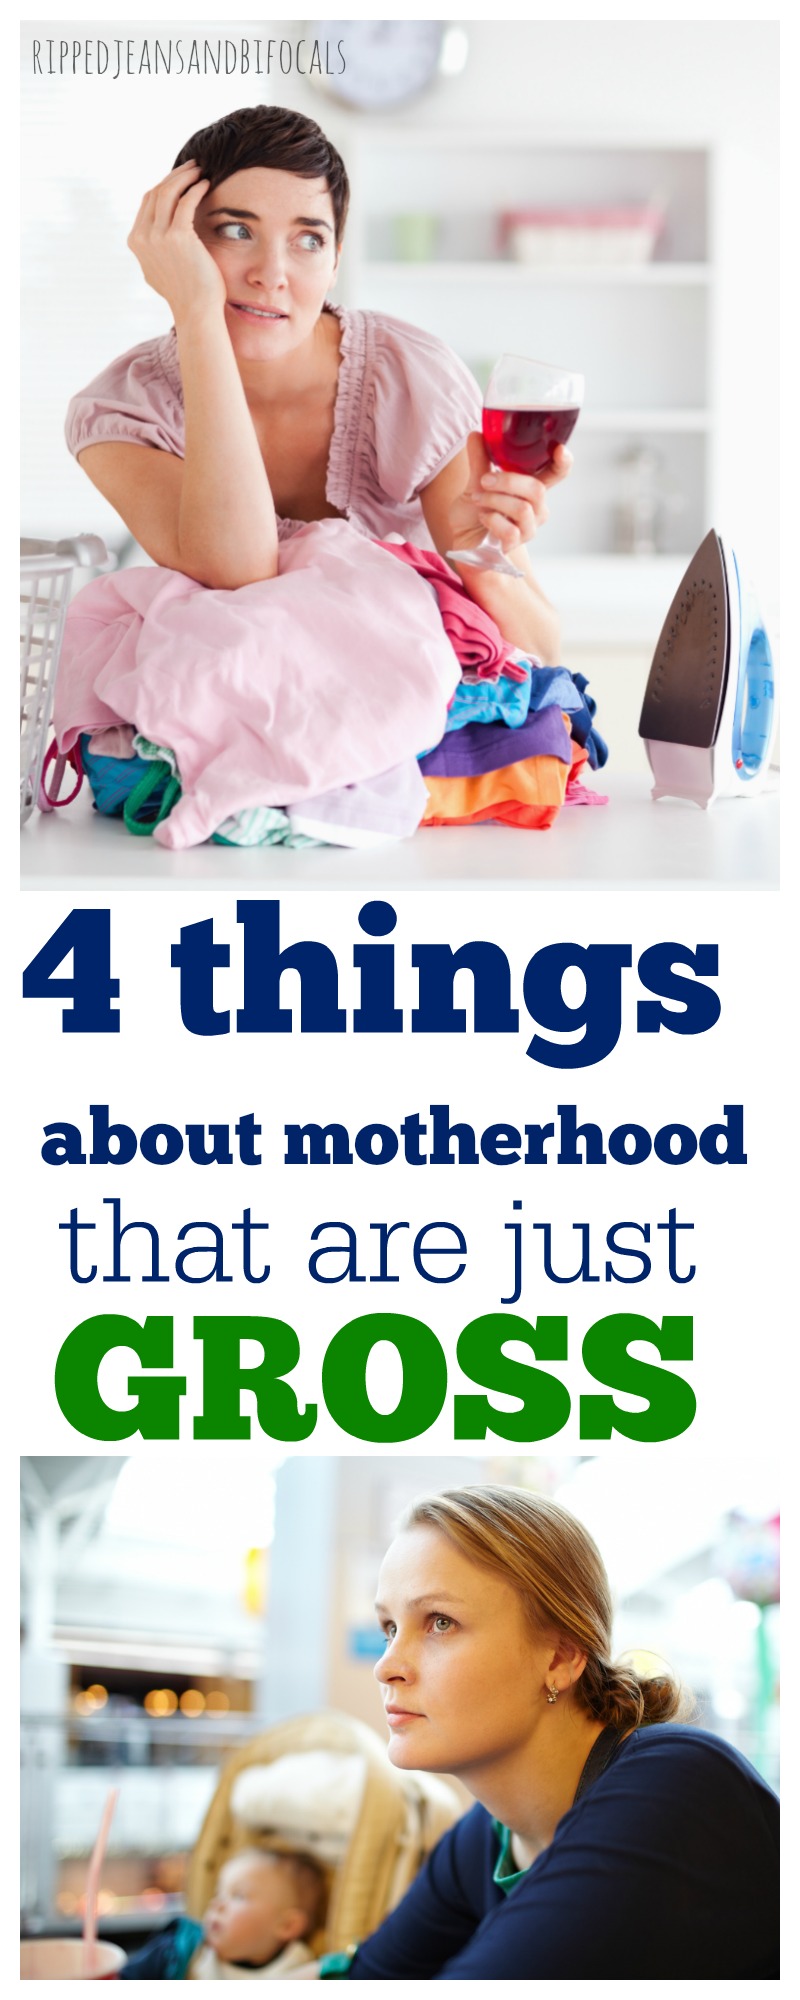 There are so many things about motherhood that are just gross. Here are just four!